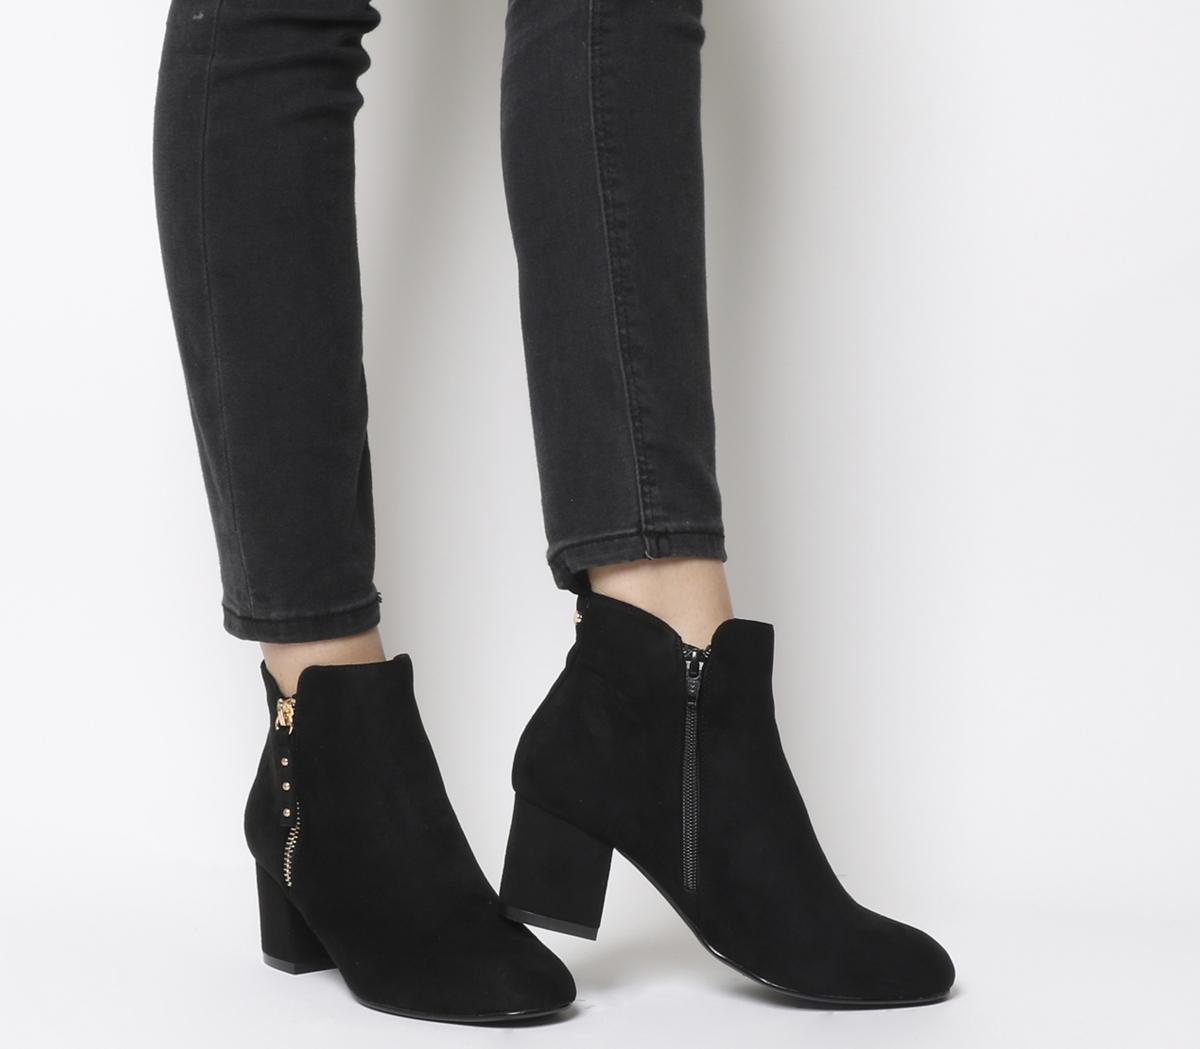 black boots with gold zip